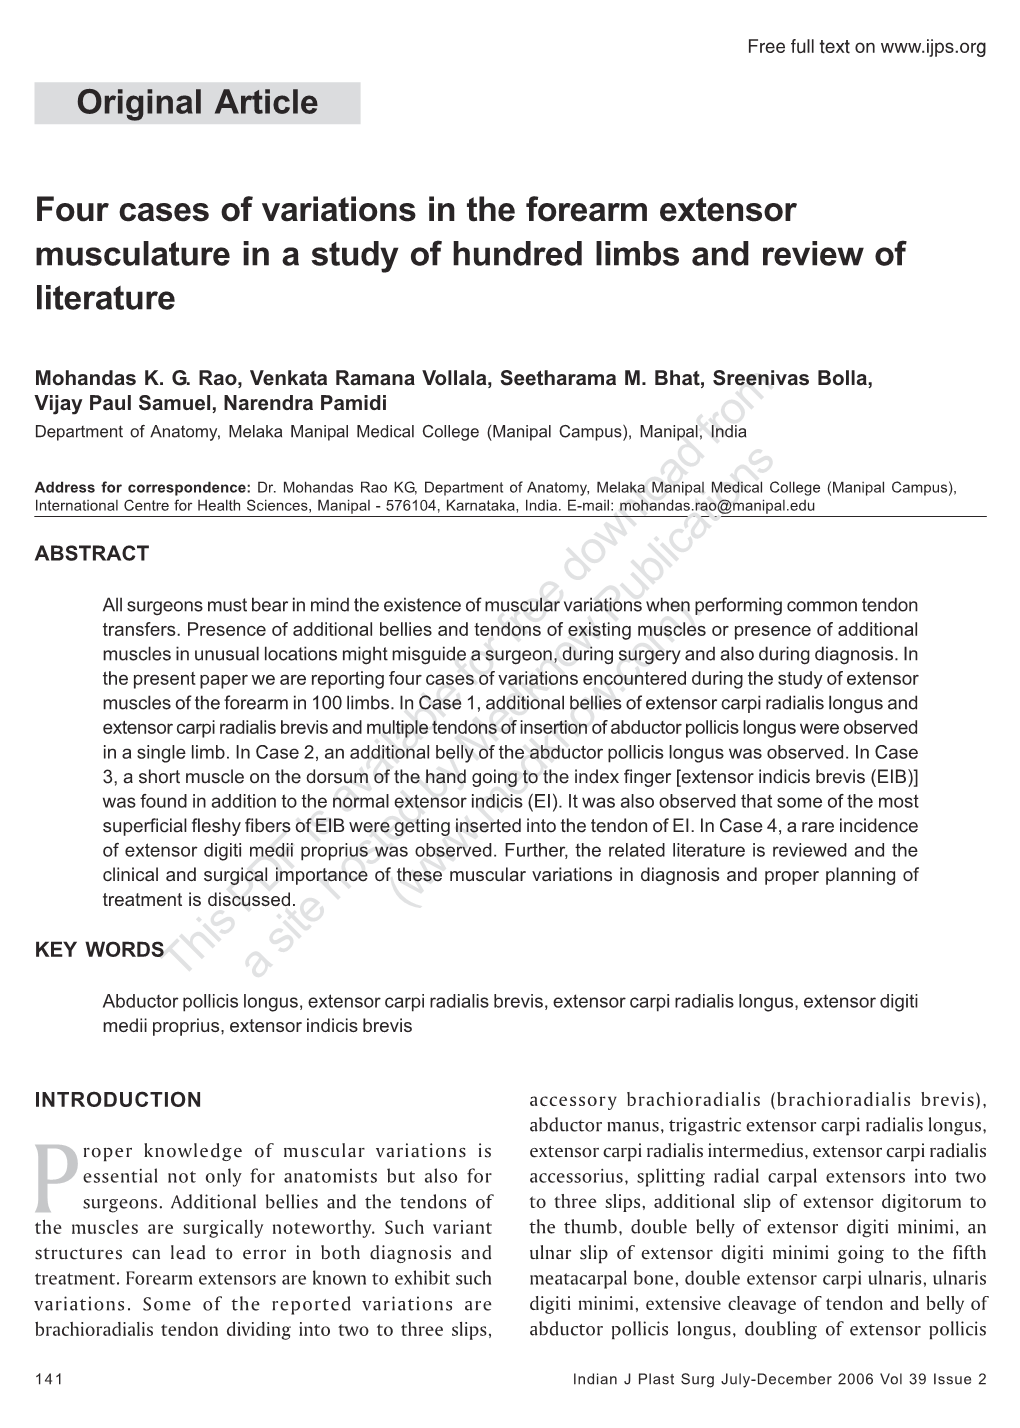 Four Cases of Variations in the Forearm Extensor Musculature in a Study of Hundred Limbs and Review of Literature